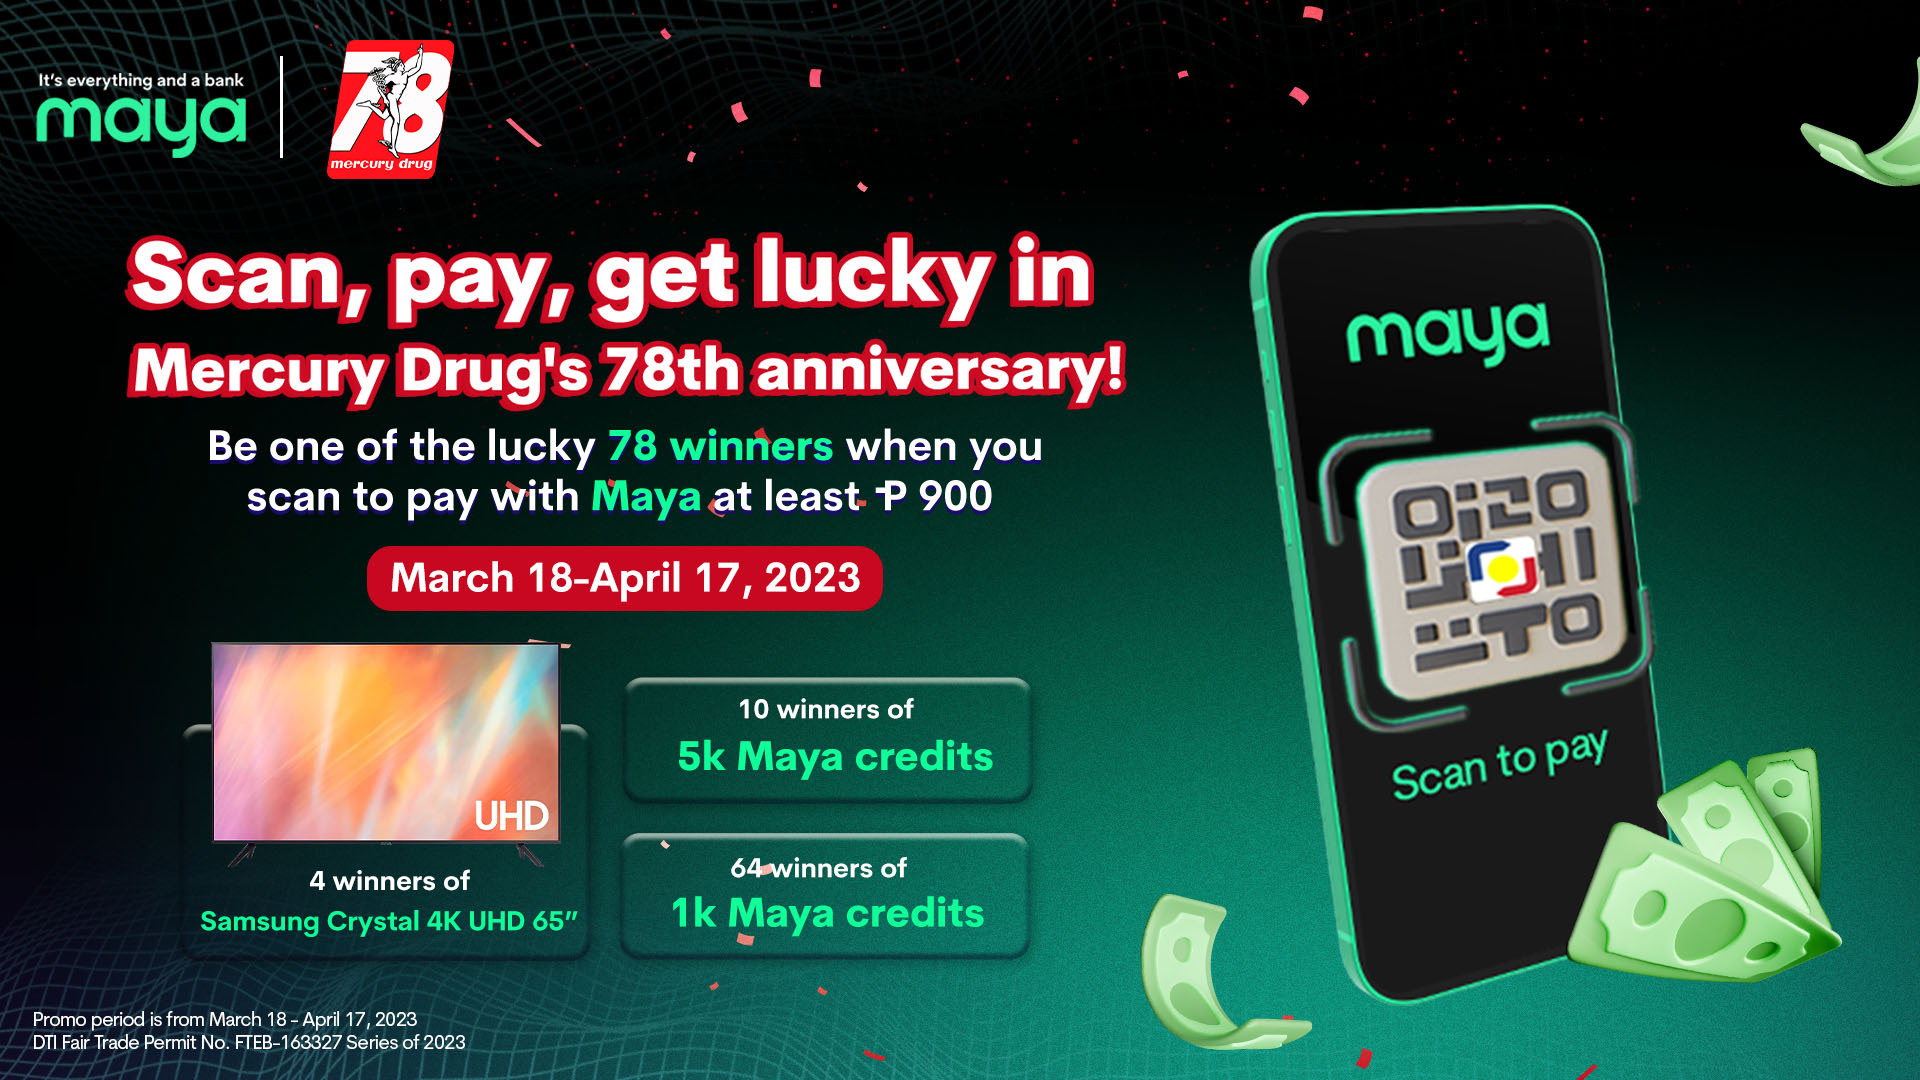 Get a chance to be one of the 78 winners when you scan to pay at least P900 in any Mercury Drug branch!